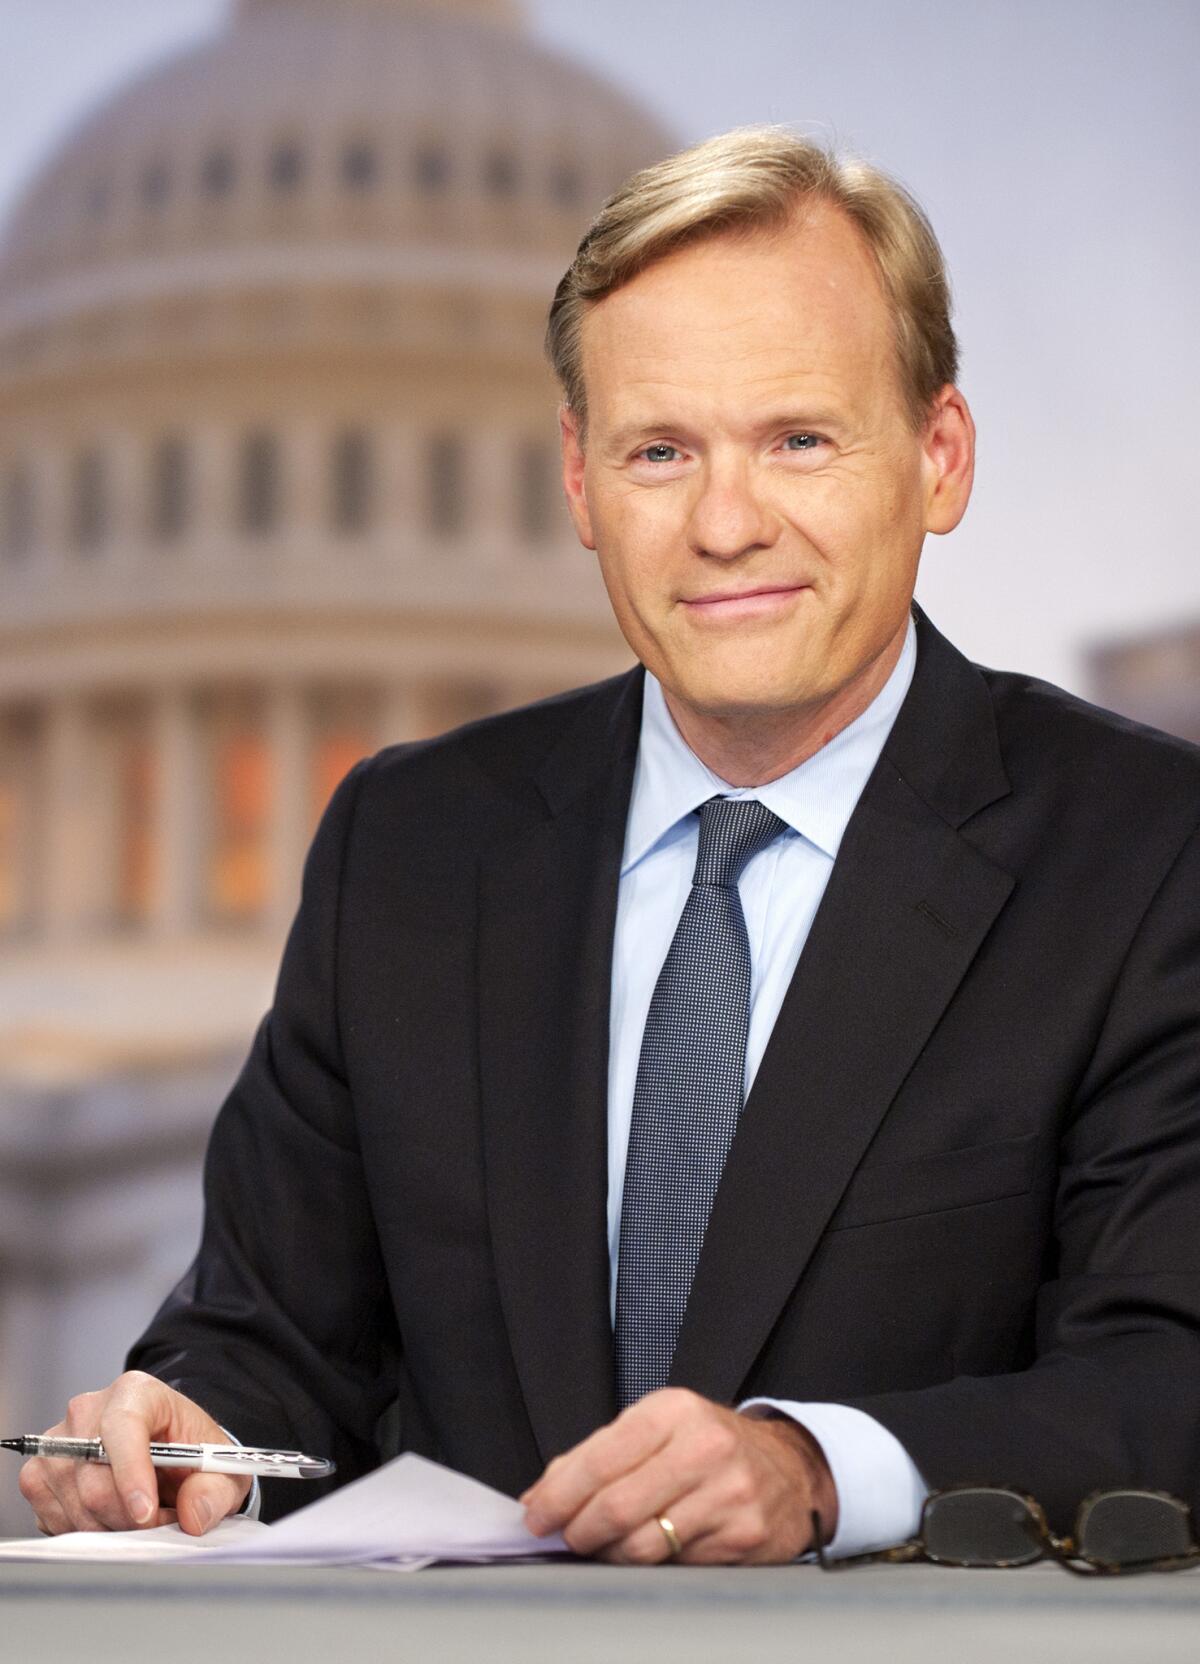 John Dickerson, the newest moderator of "Face the Nation."